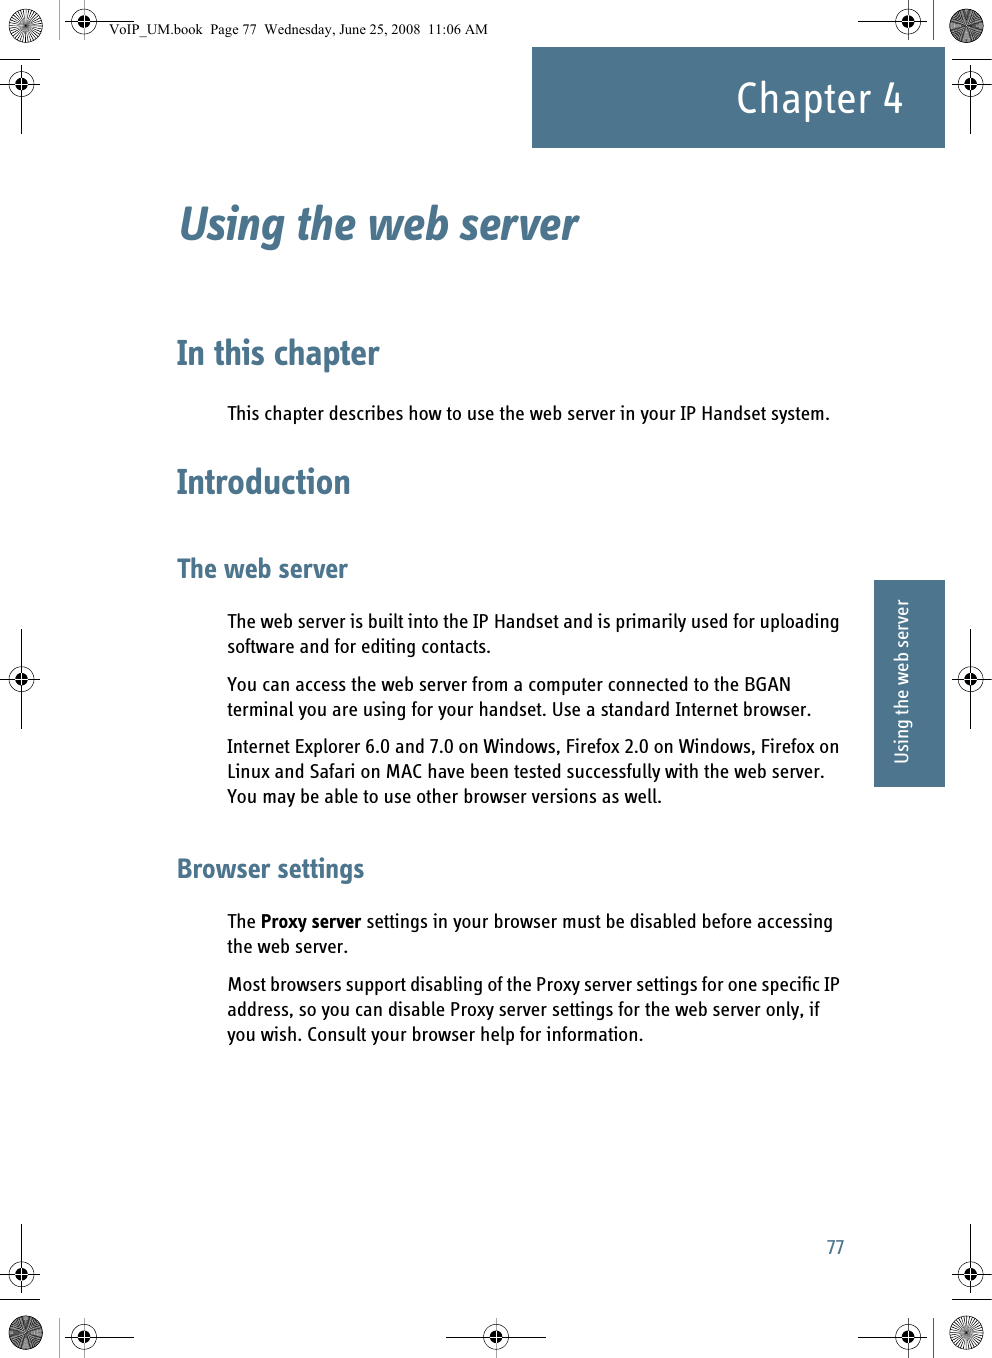 77Chapter 444444Using the web serverUsing the web server 4In this chapterThis chapter describes how to use the web server in your IP Handset system.IntroductionThe web serverThe web server is built into the IP Handset and is primarily used for uploading software and for editing contacts.You can access the web server from a computer connected to the BGAN terminal you are using for your handset. Use a standard Internet browser. Internet Explorer 6.0 and 7.0 on Windows, Firefox 2.0 on Windows, Firefox on Linux and Safari on MAC have been tested successfully with the web server. You may be able to use other browser versions as well.Browser settingsThe Proxy server settings in your browser must be disabled before accessing the web server. Most browsers support disabling of the Proxy server settings for one specific IP address, so you can disable Proxy server settings for the web server only, if you wish. Consult your browser help for information.VoIP_UM.book  Page 77  Wednesday, June 25, 2008  11:06 AM